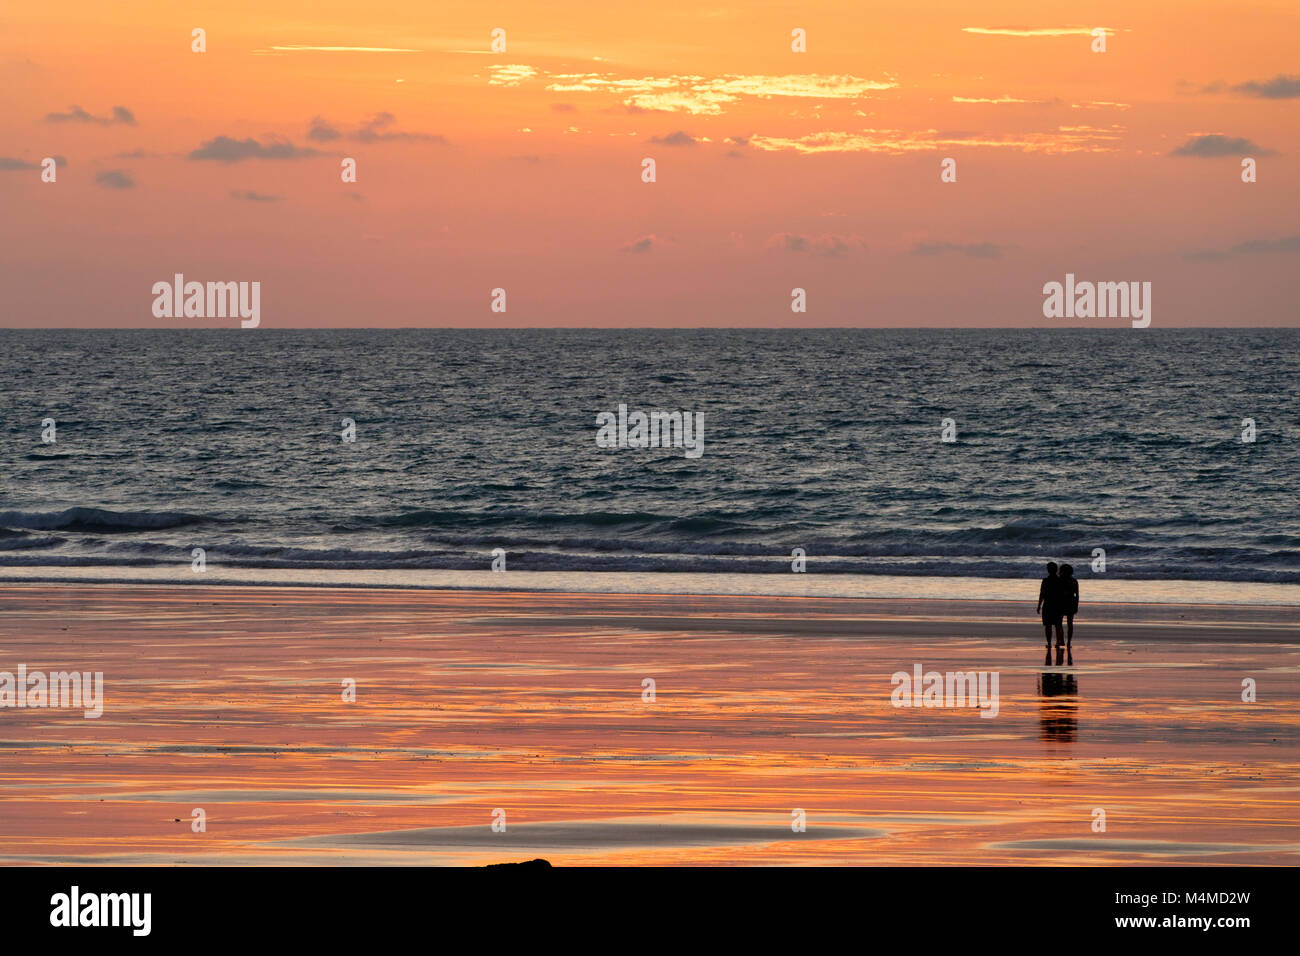 People on beach after sunset, Cable Beach, Broome, West Kimberley, Western Australia Stock Photo